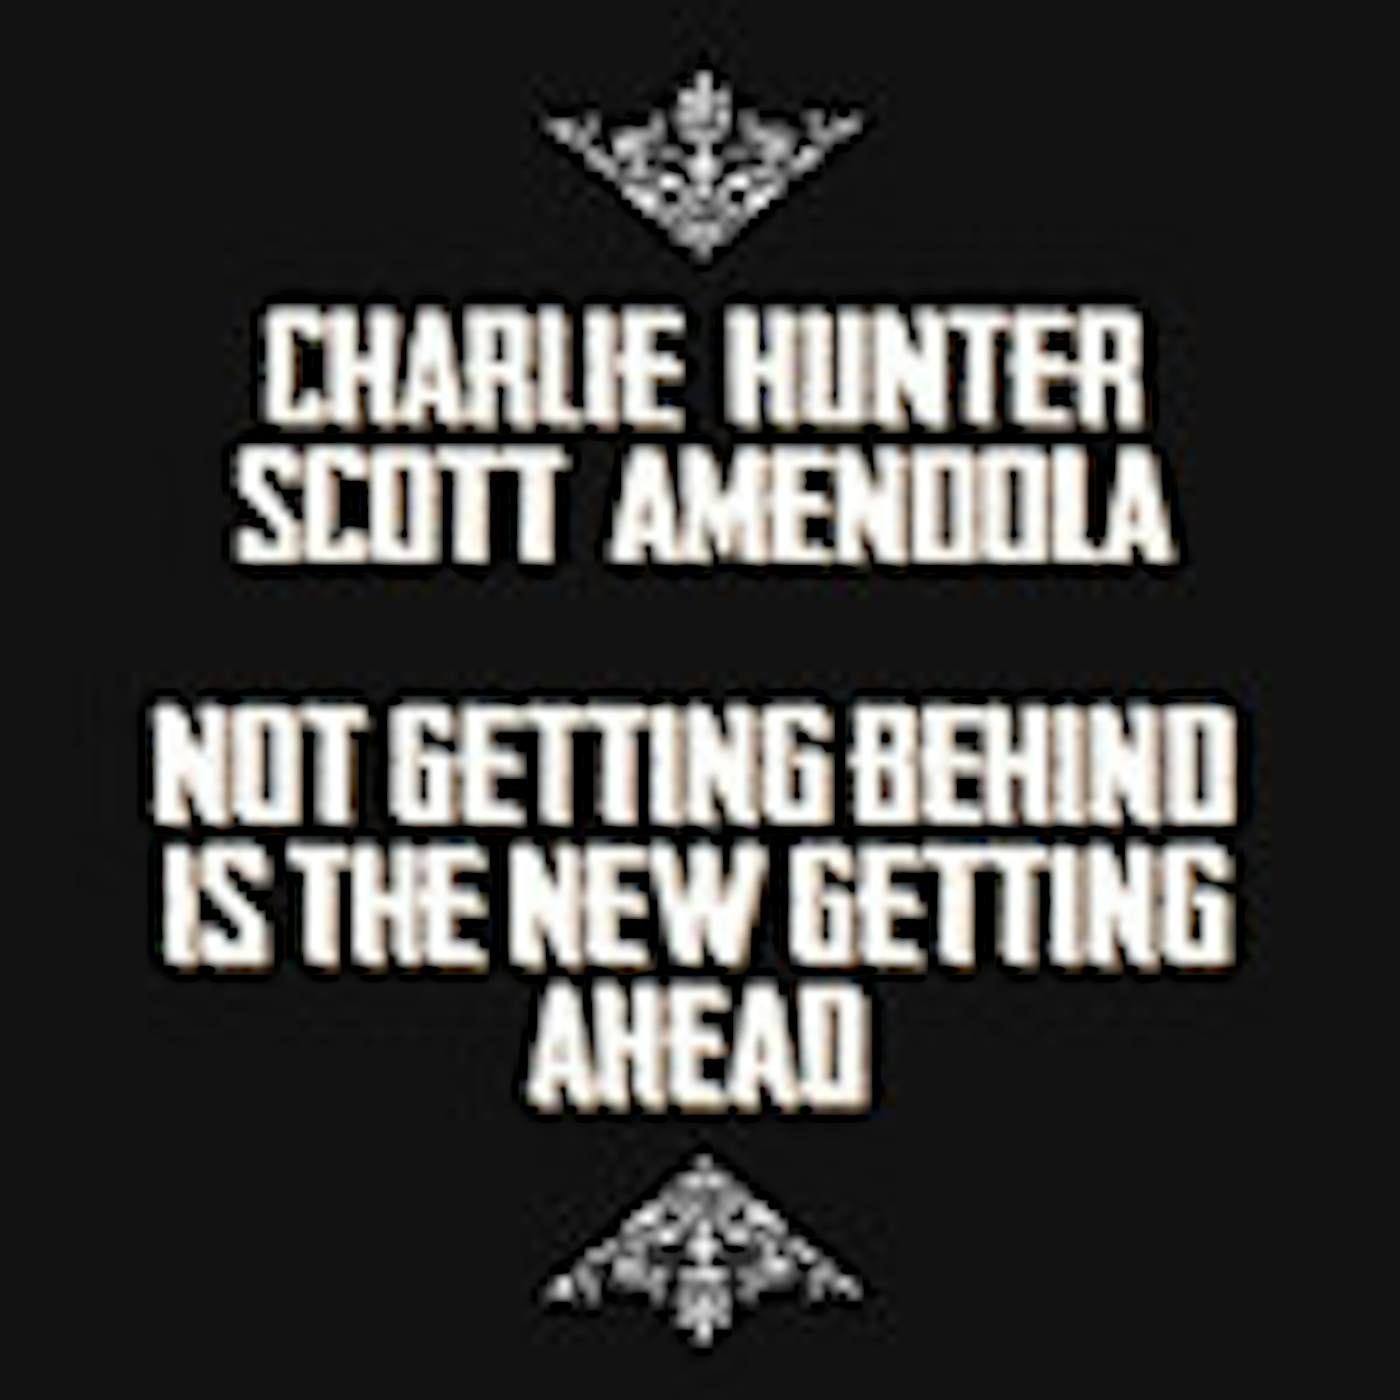 Charlie Hunter Not Getting Behind Is The New Getting Ahead Vinyl Record